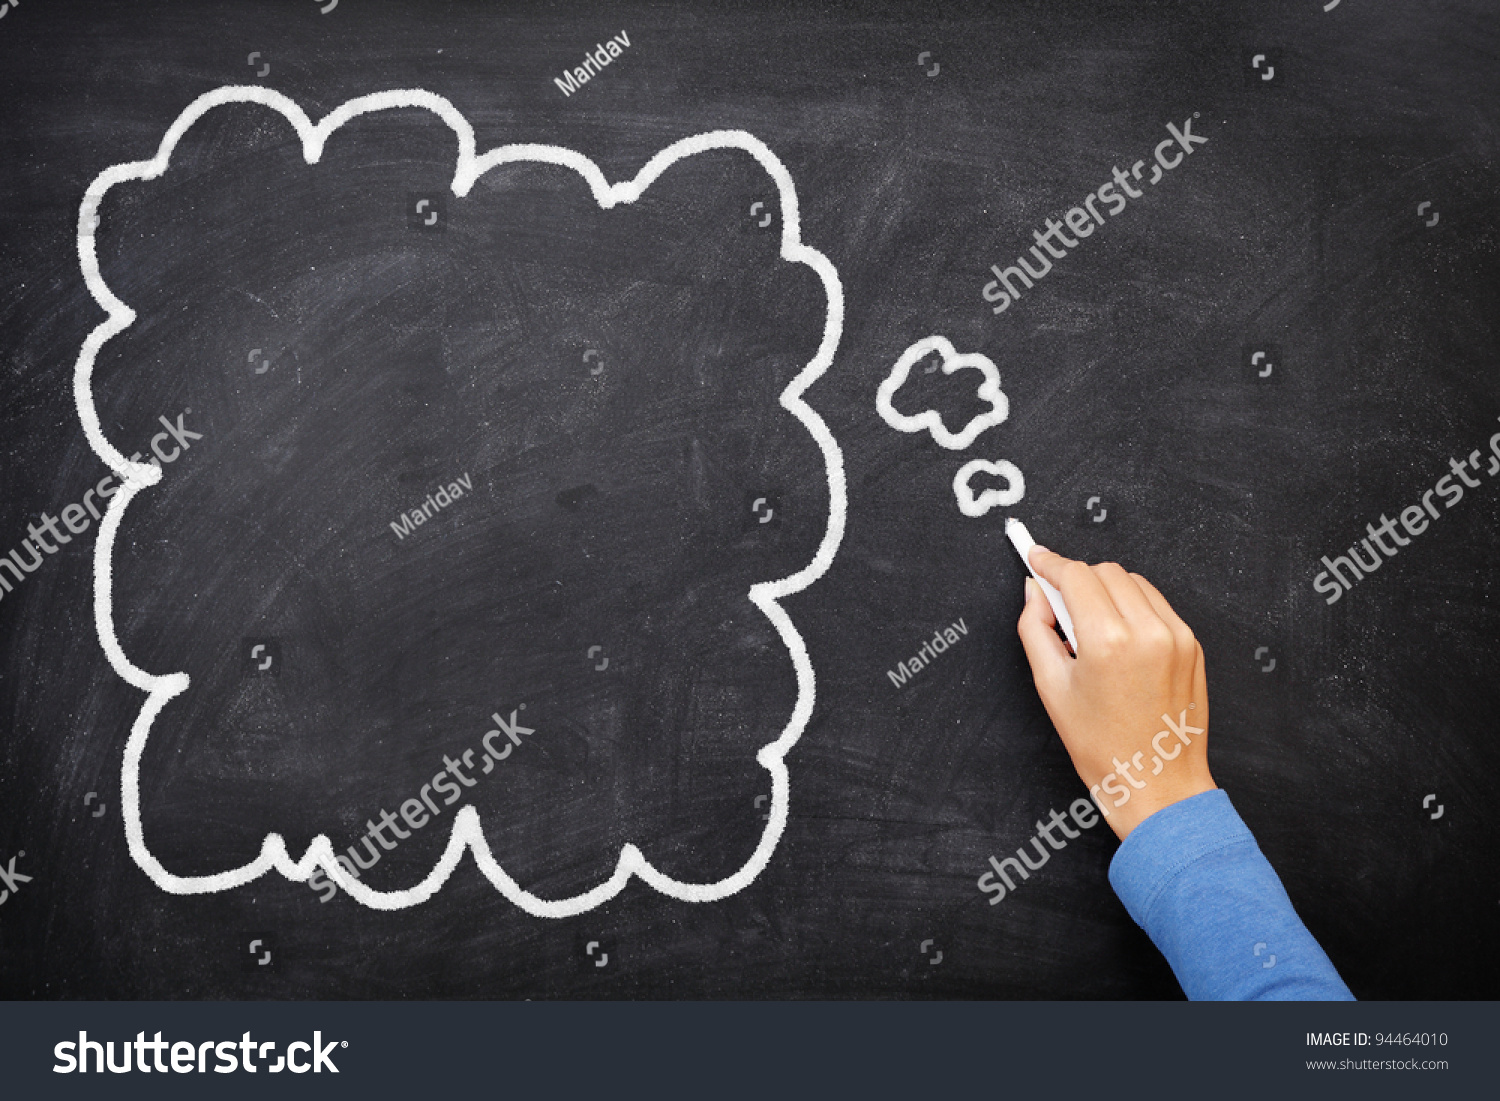 Thought Bubble Blackboard Chalkboard Thought Bubble Drawing With